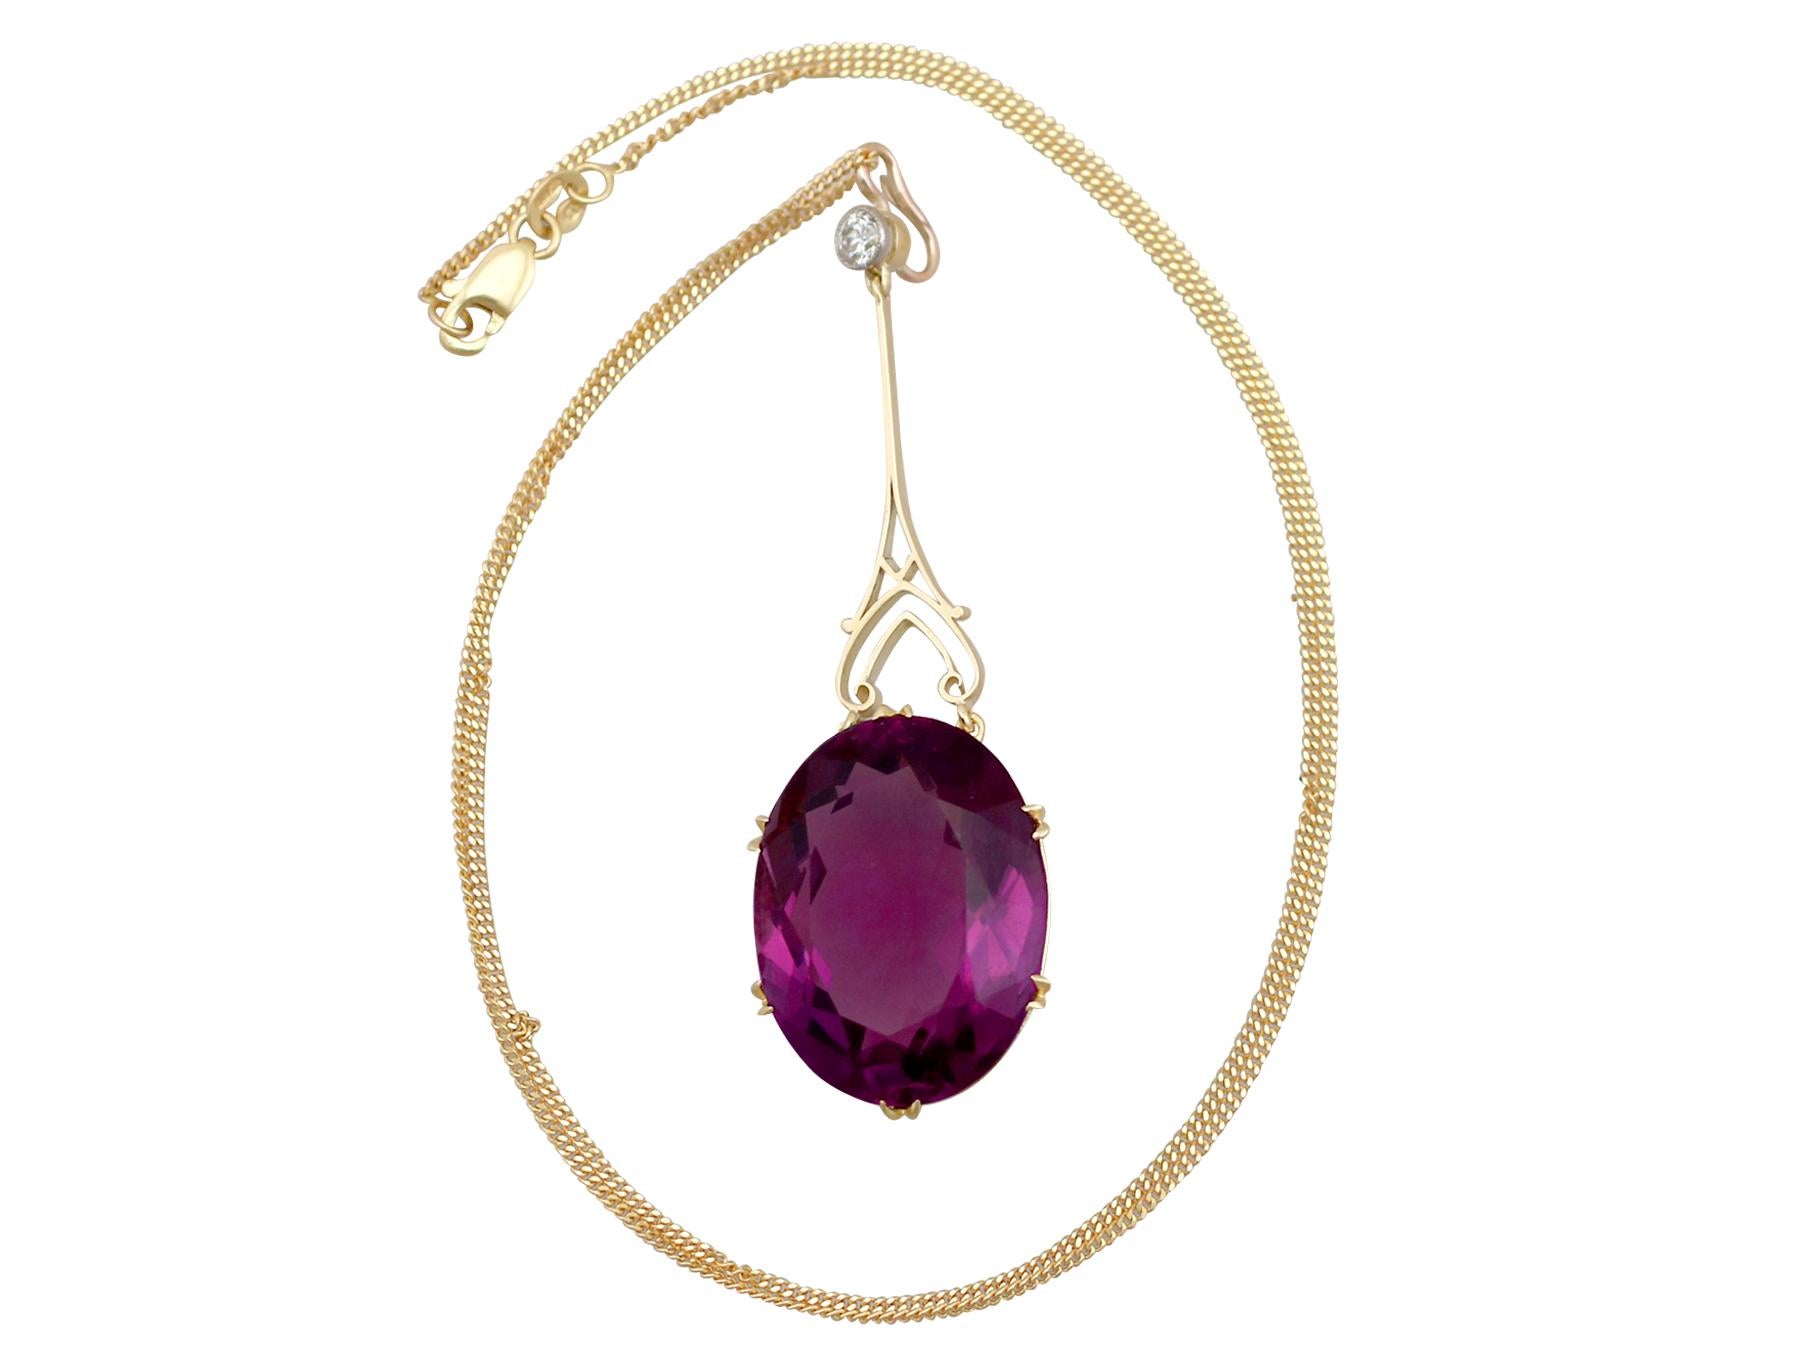 An impressive Victorian 24.63 carat amethyst and 0.15 carat diamond, 15k gold pendant and 18 karat gold chain; part of our diverse antique jewelry collections.

This fine and impressive oval cut amethyst pendant has been crafted in 15k yellow gold